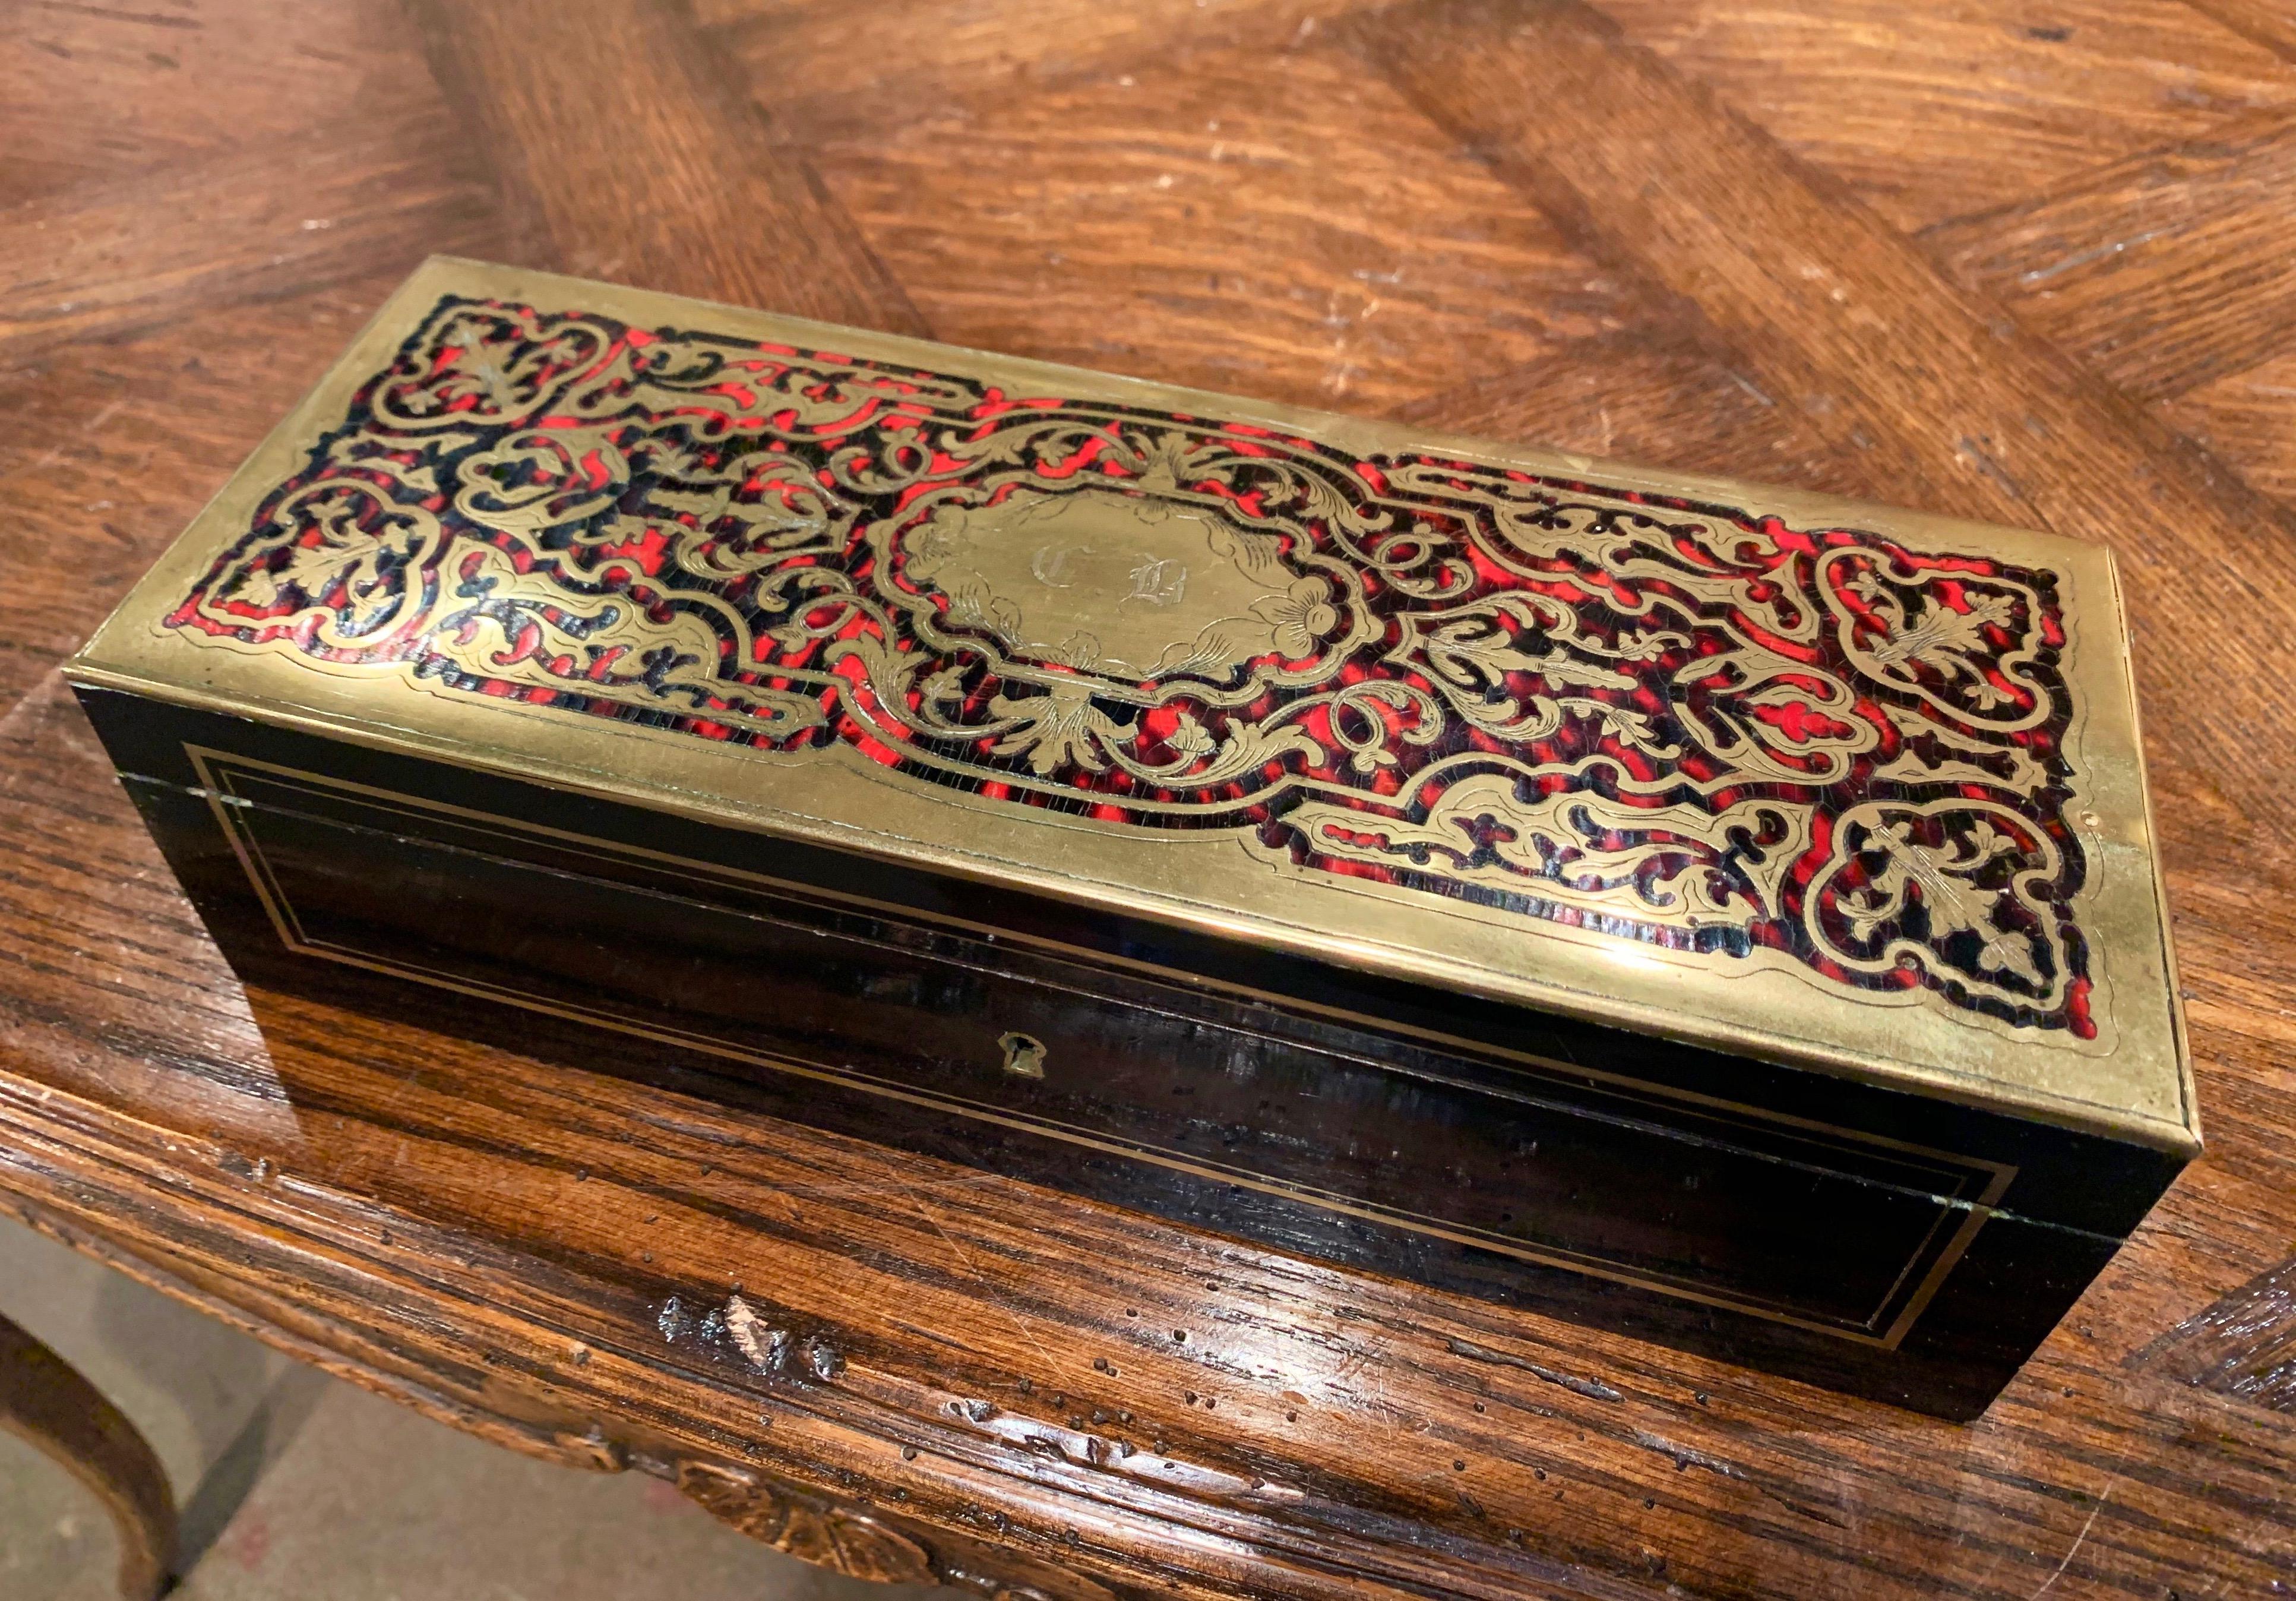 Created in France circa 1880 in the manner of André-Charles Boulle, the rectangular box with drop-down front, is decorated with arabesques of gilded brass inlay motifs on the top with the initials 